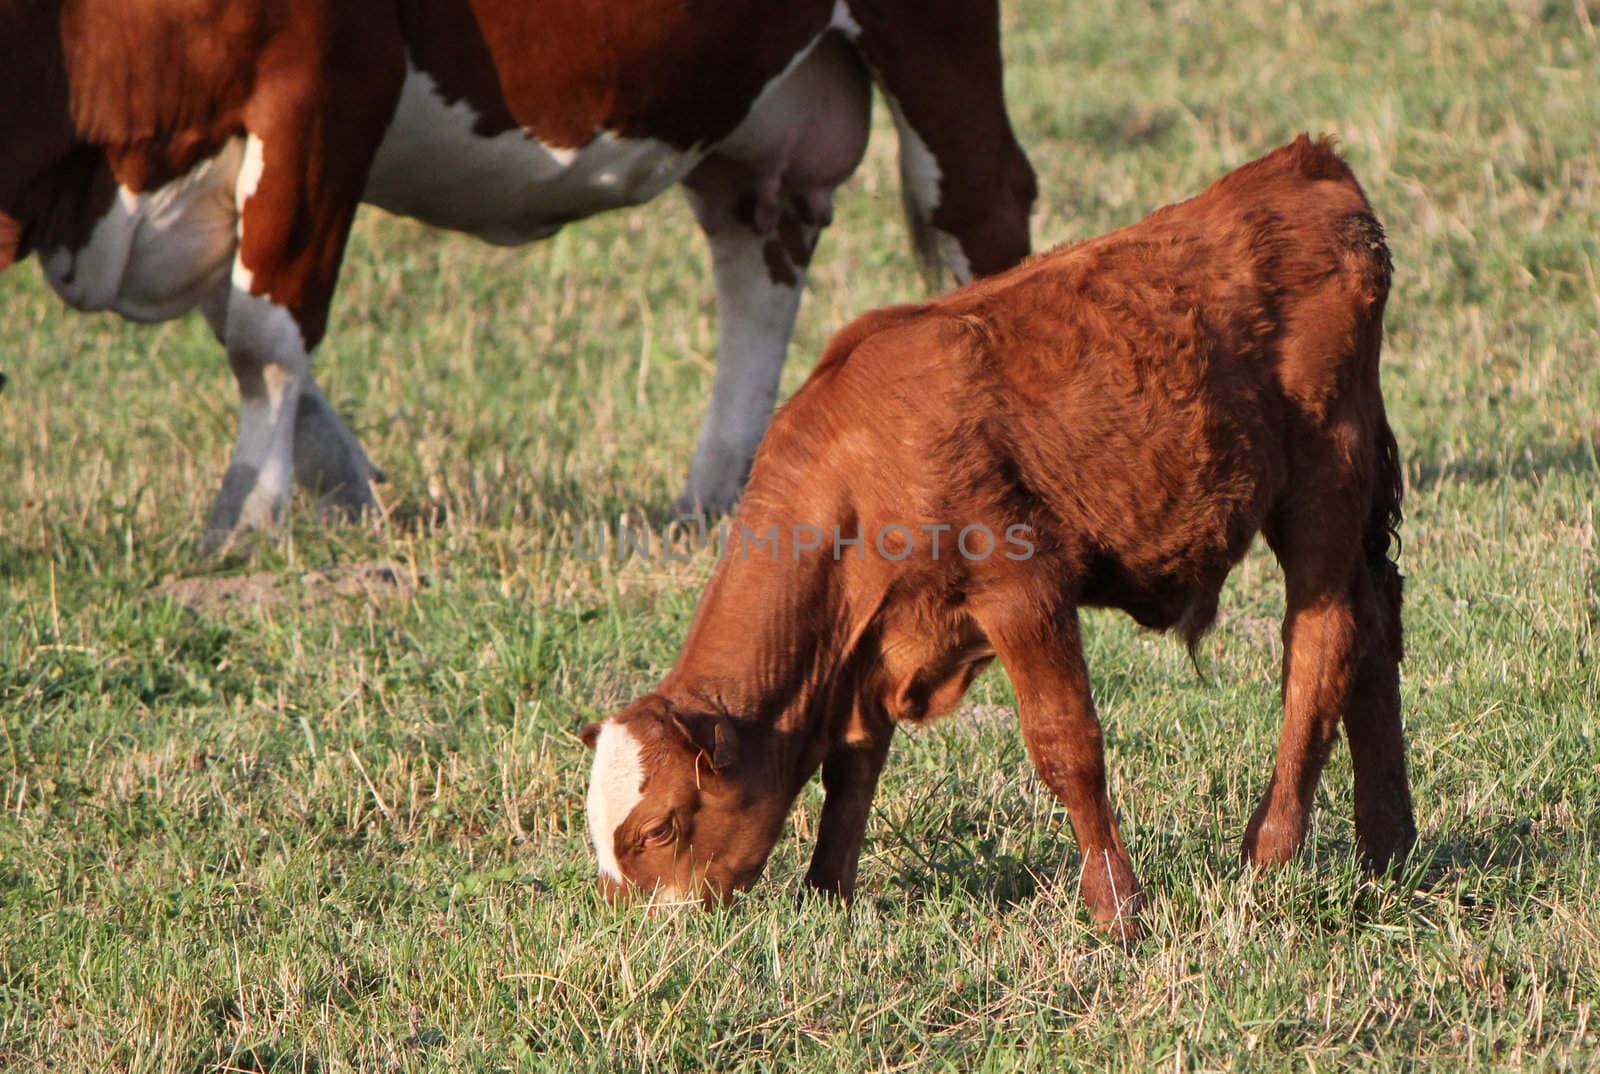 Young brown calf eating the grass next to a big cow feet